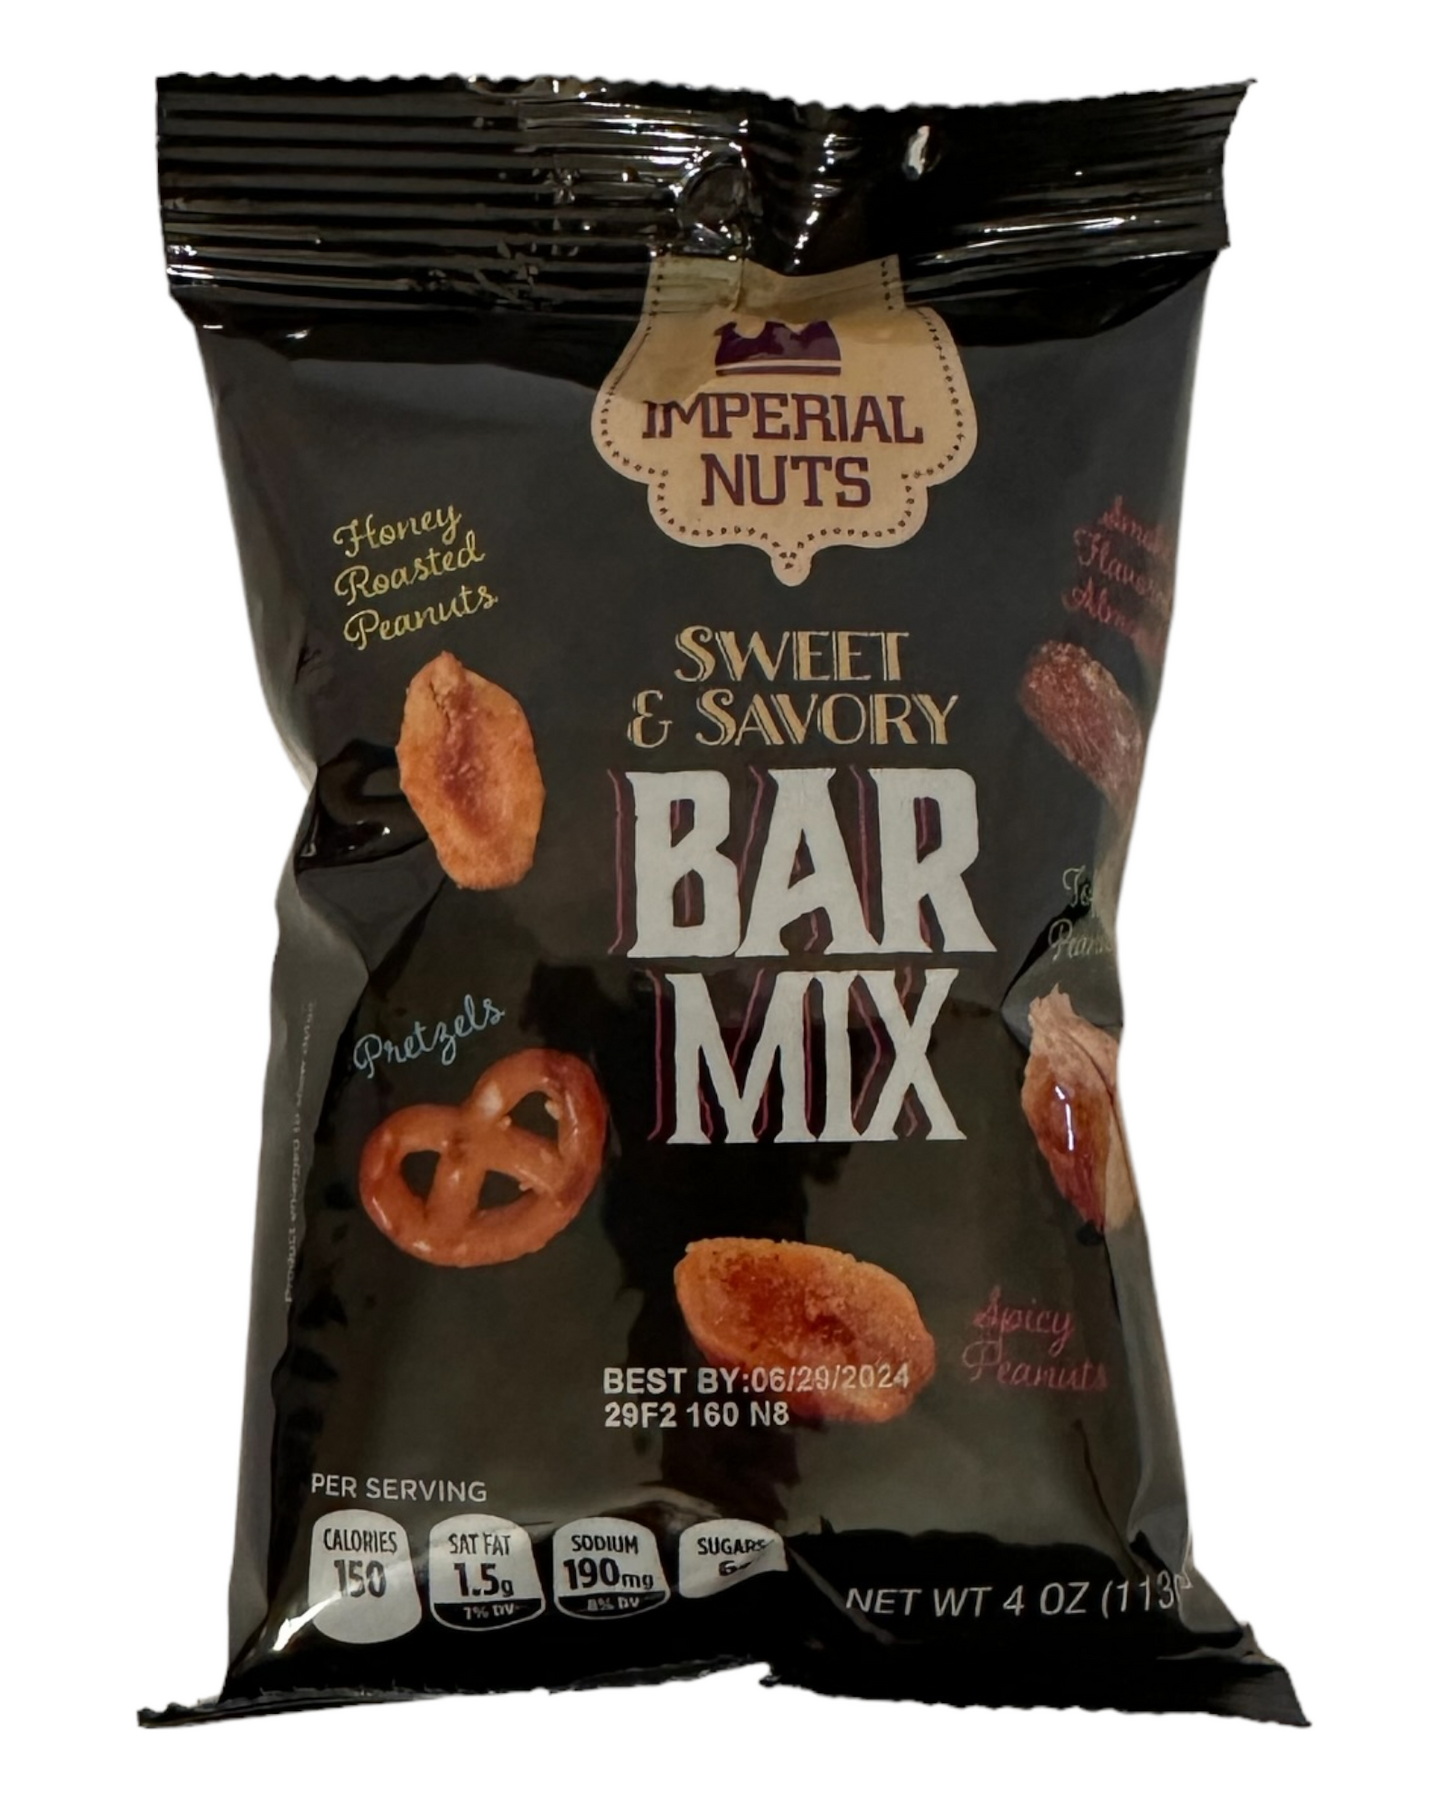 Imperial Nuts Sweet & Savory Bar Mix